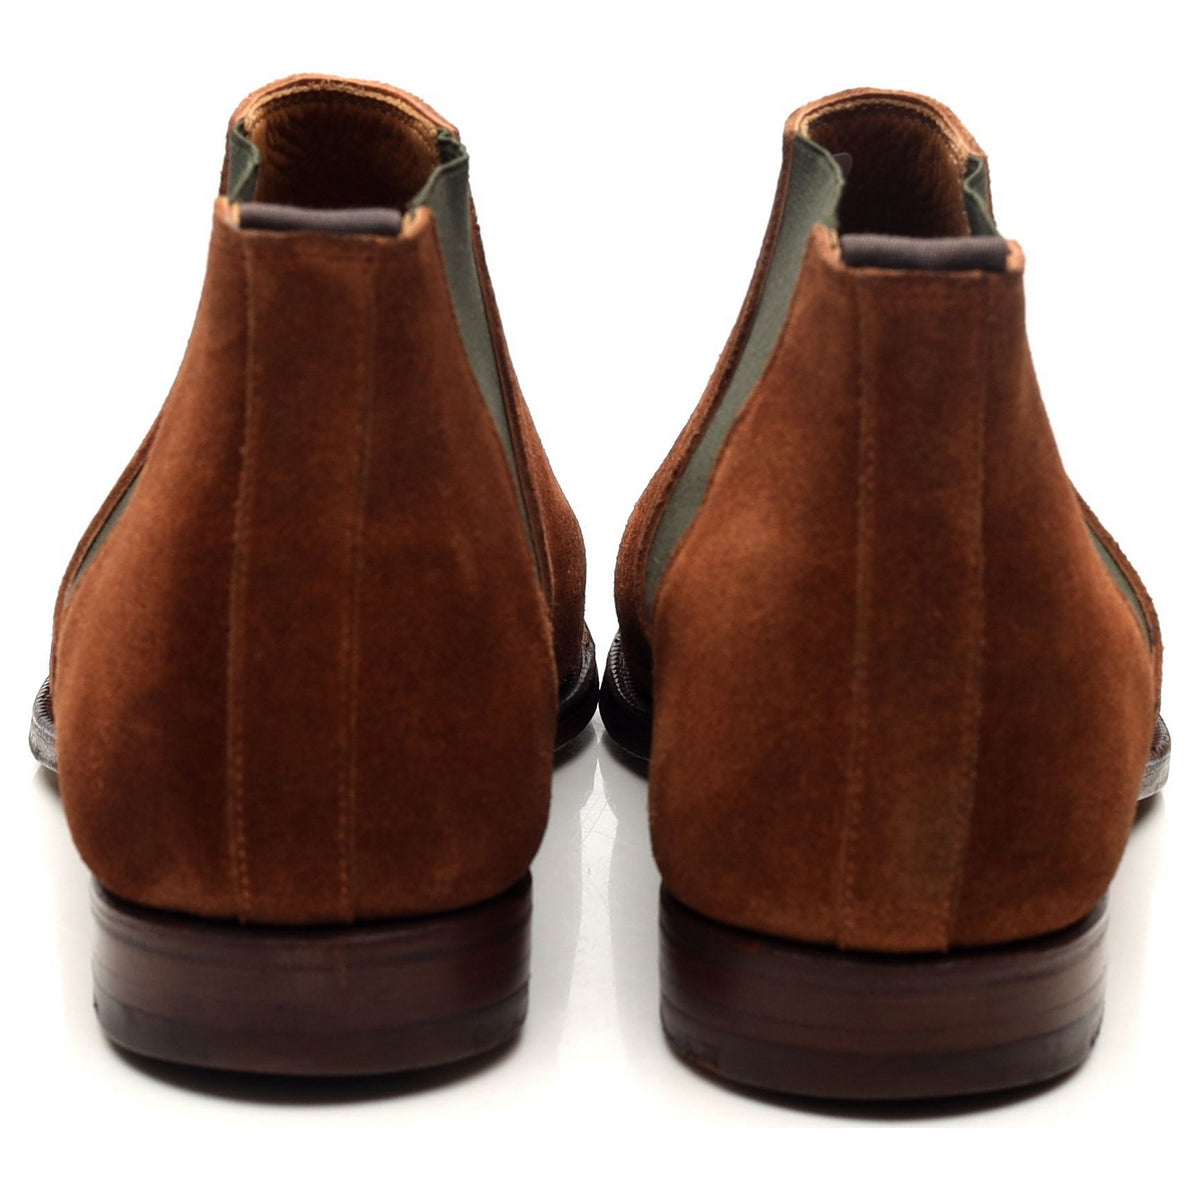 Cranford 3' Tan Brown Suede Chelsea Boots UK 7 E - Abbot's Shoes